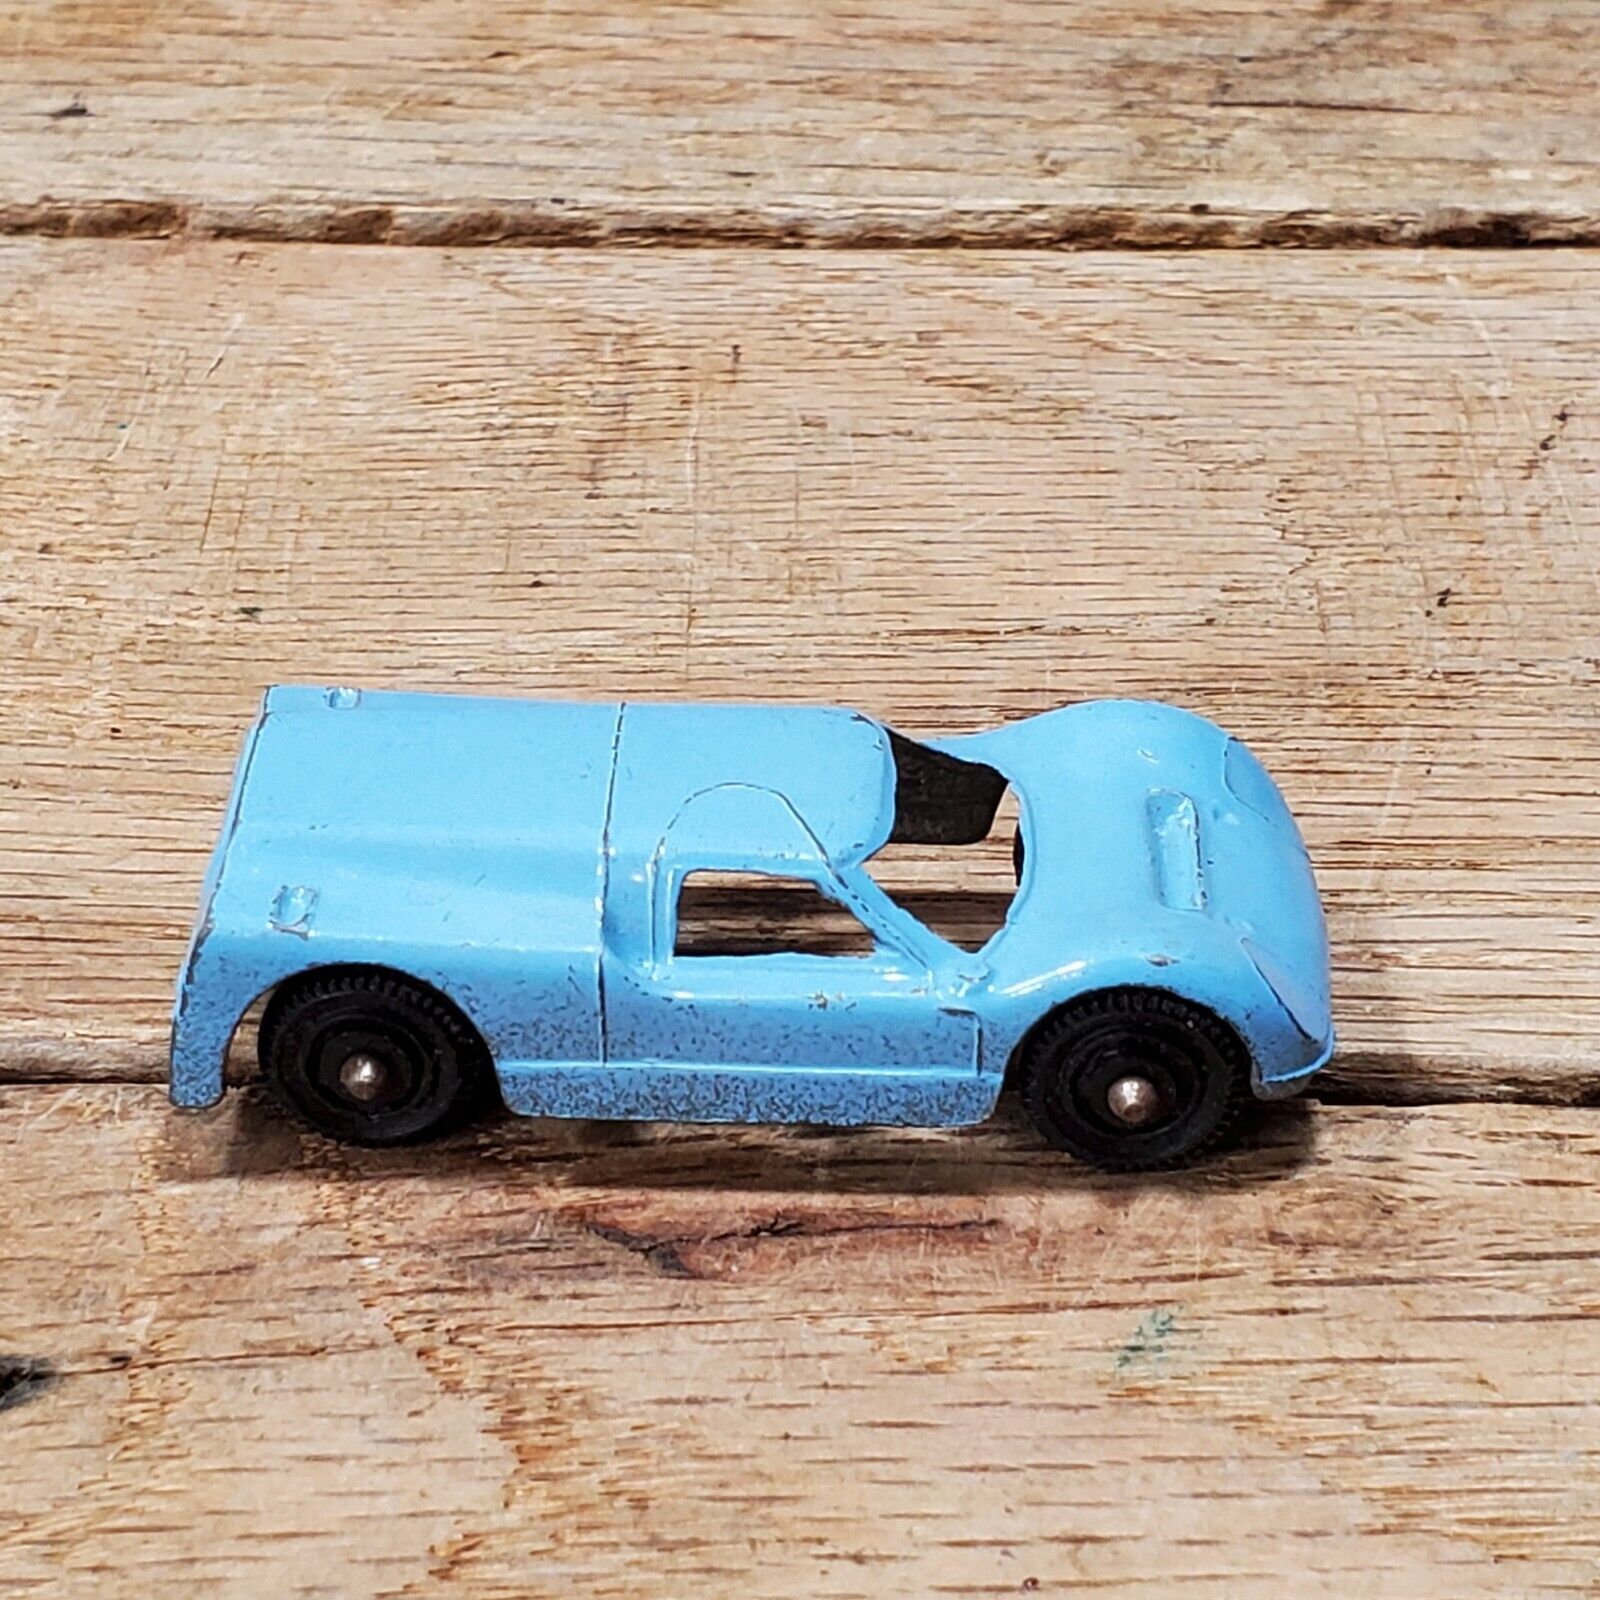 TOOTSIETOY Vintage 1969 FORD G.T. GT 2-1/8" Diecast Metal, Blue Toy Car - $3.91